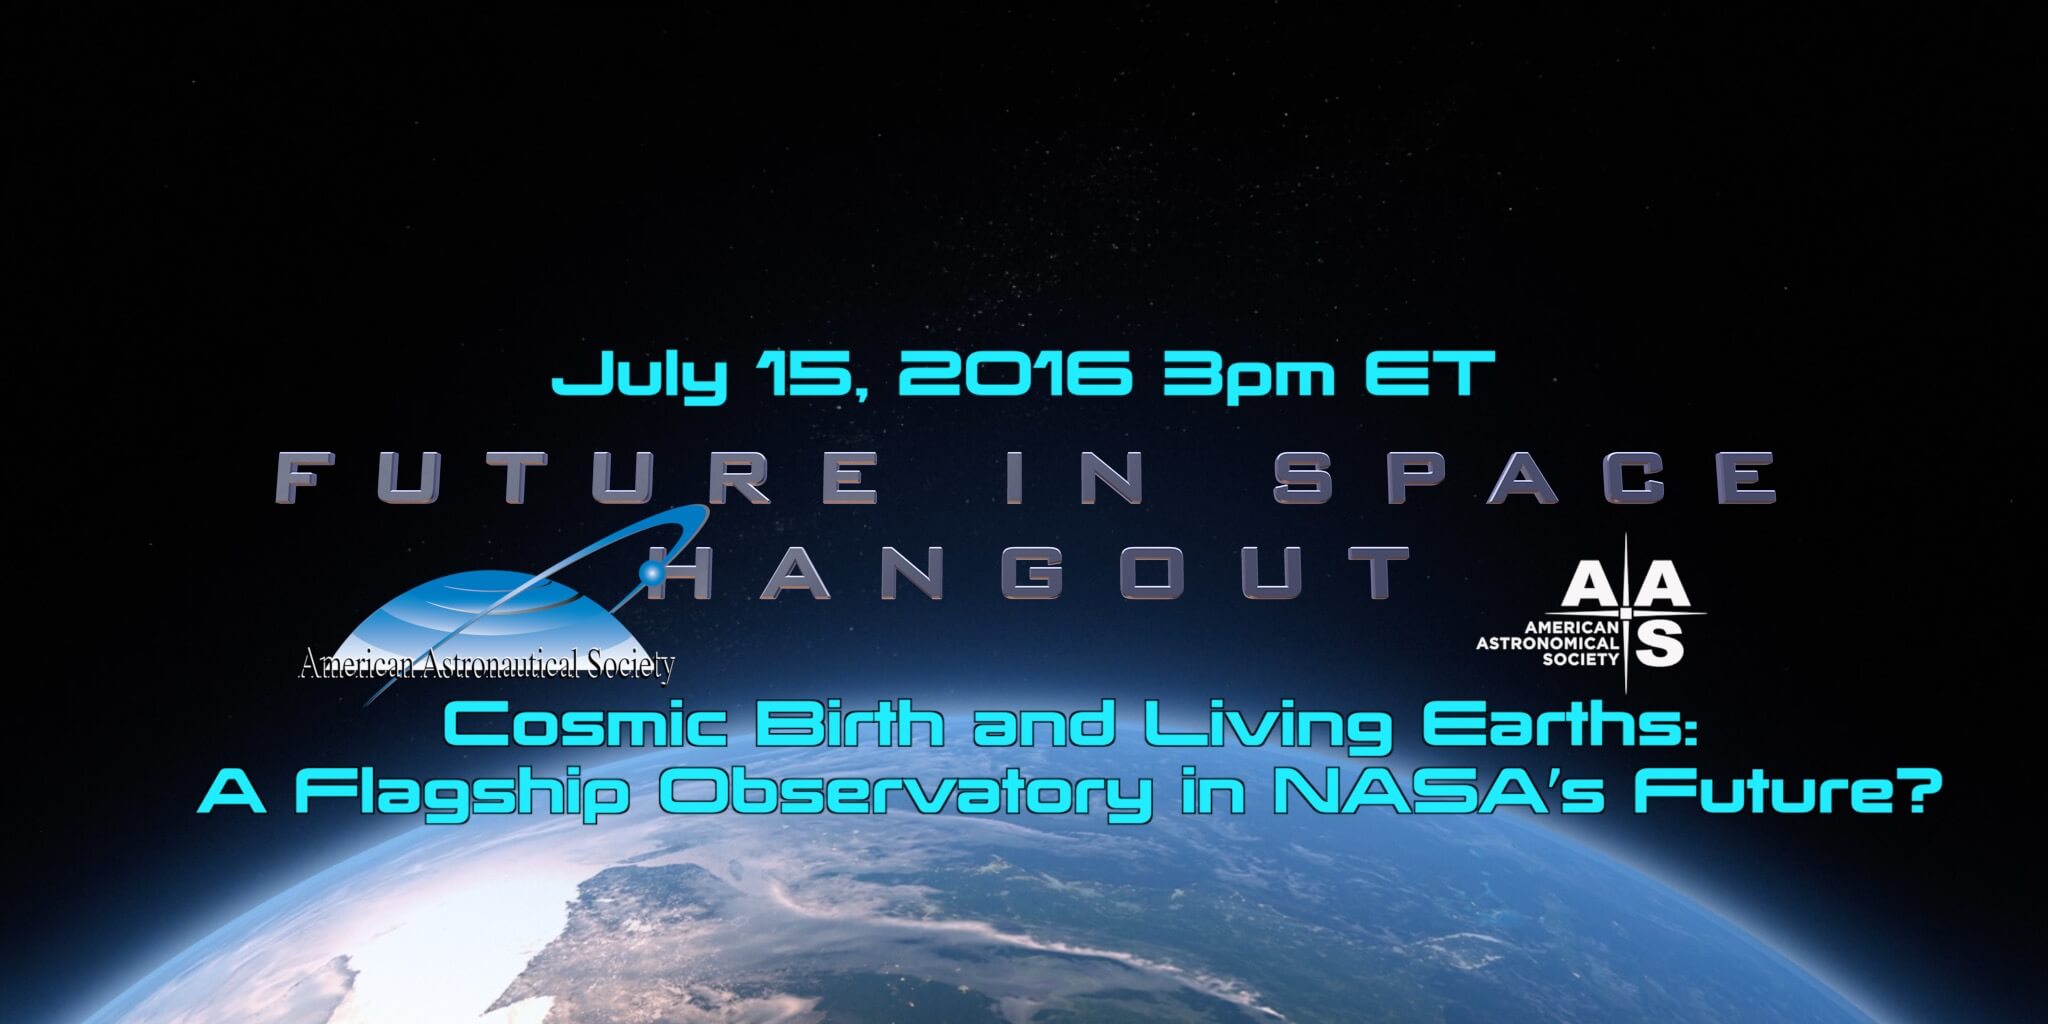 Cosmic Birth and Living Earths: A Flagship Observatory in NASA’s Future? hangout